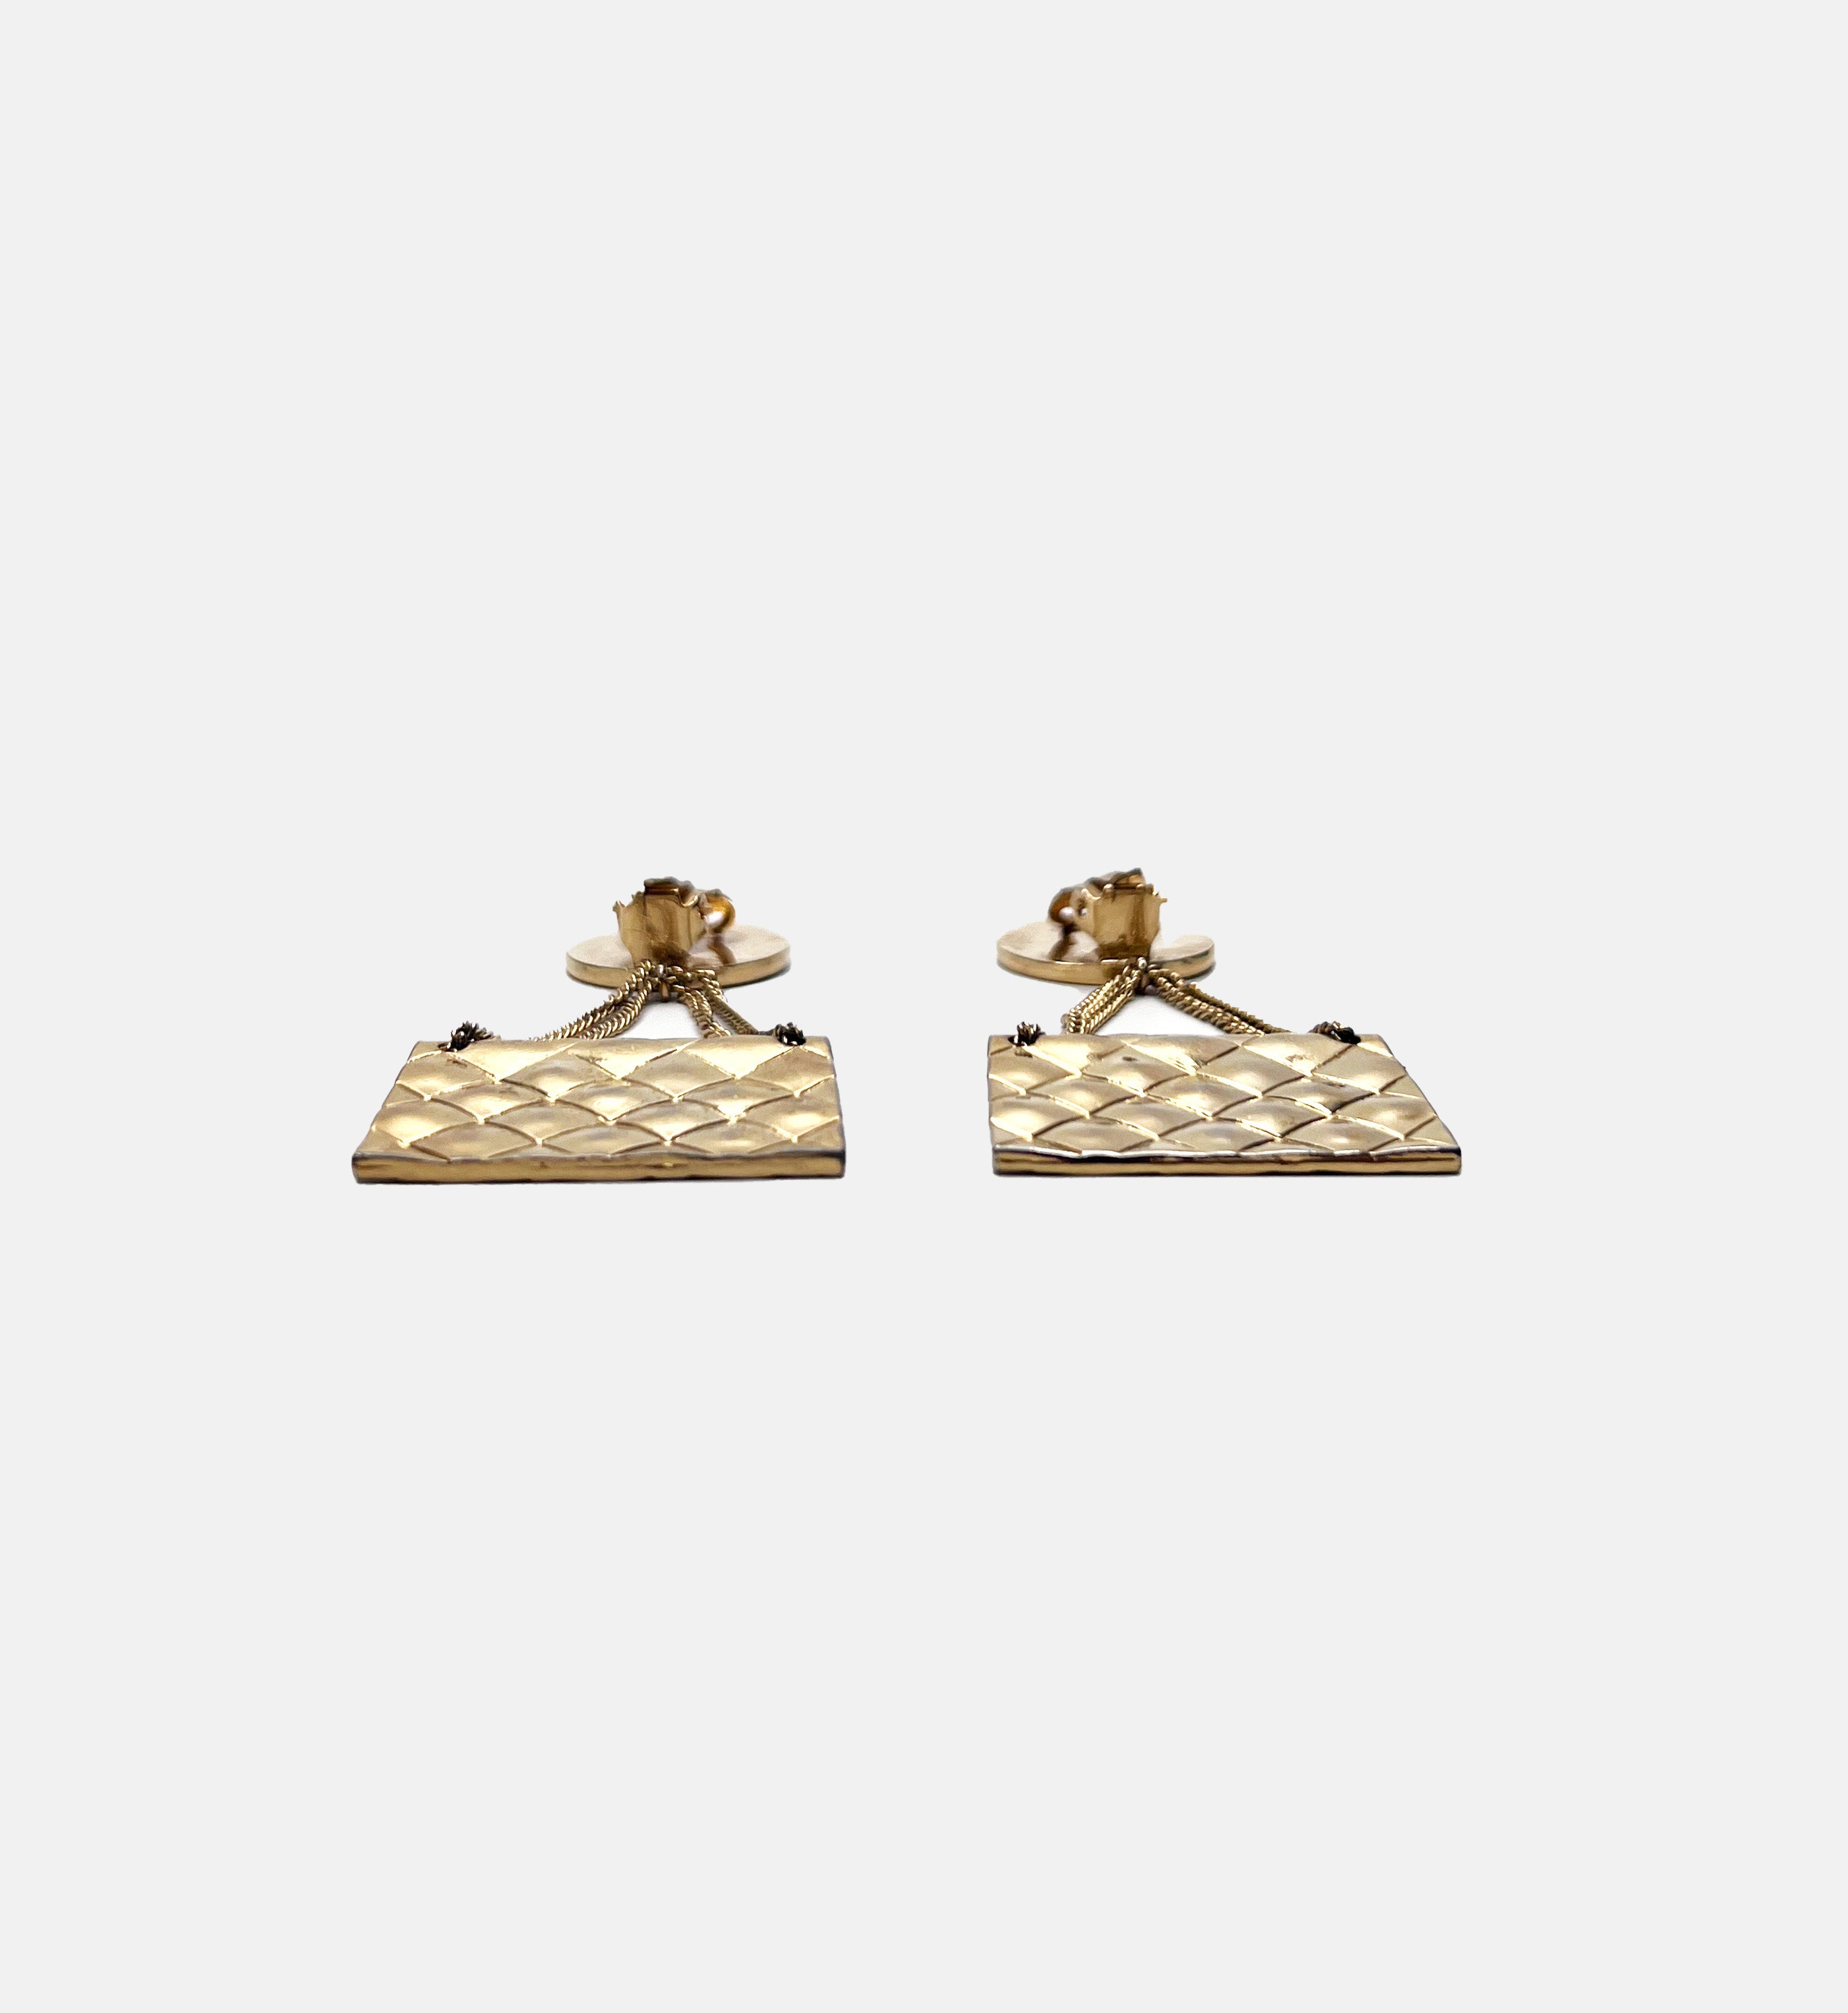 Vintage 1980 CC Clip on Earrings 24K Gold Plated